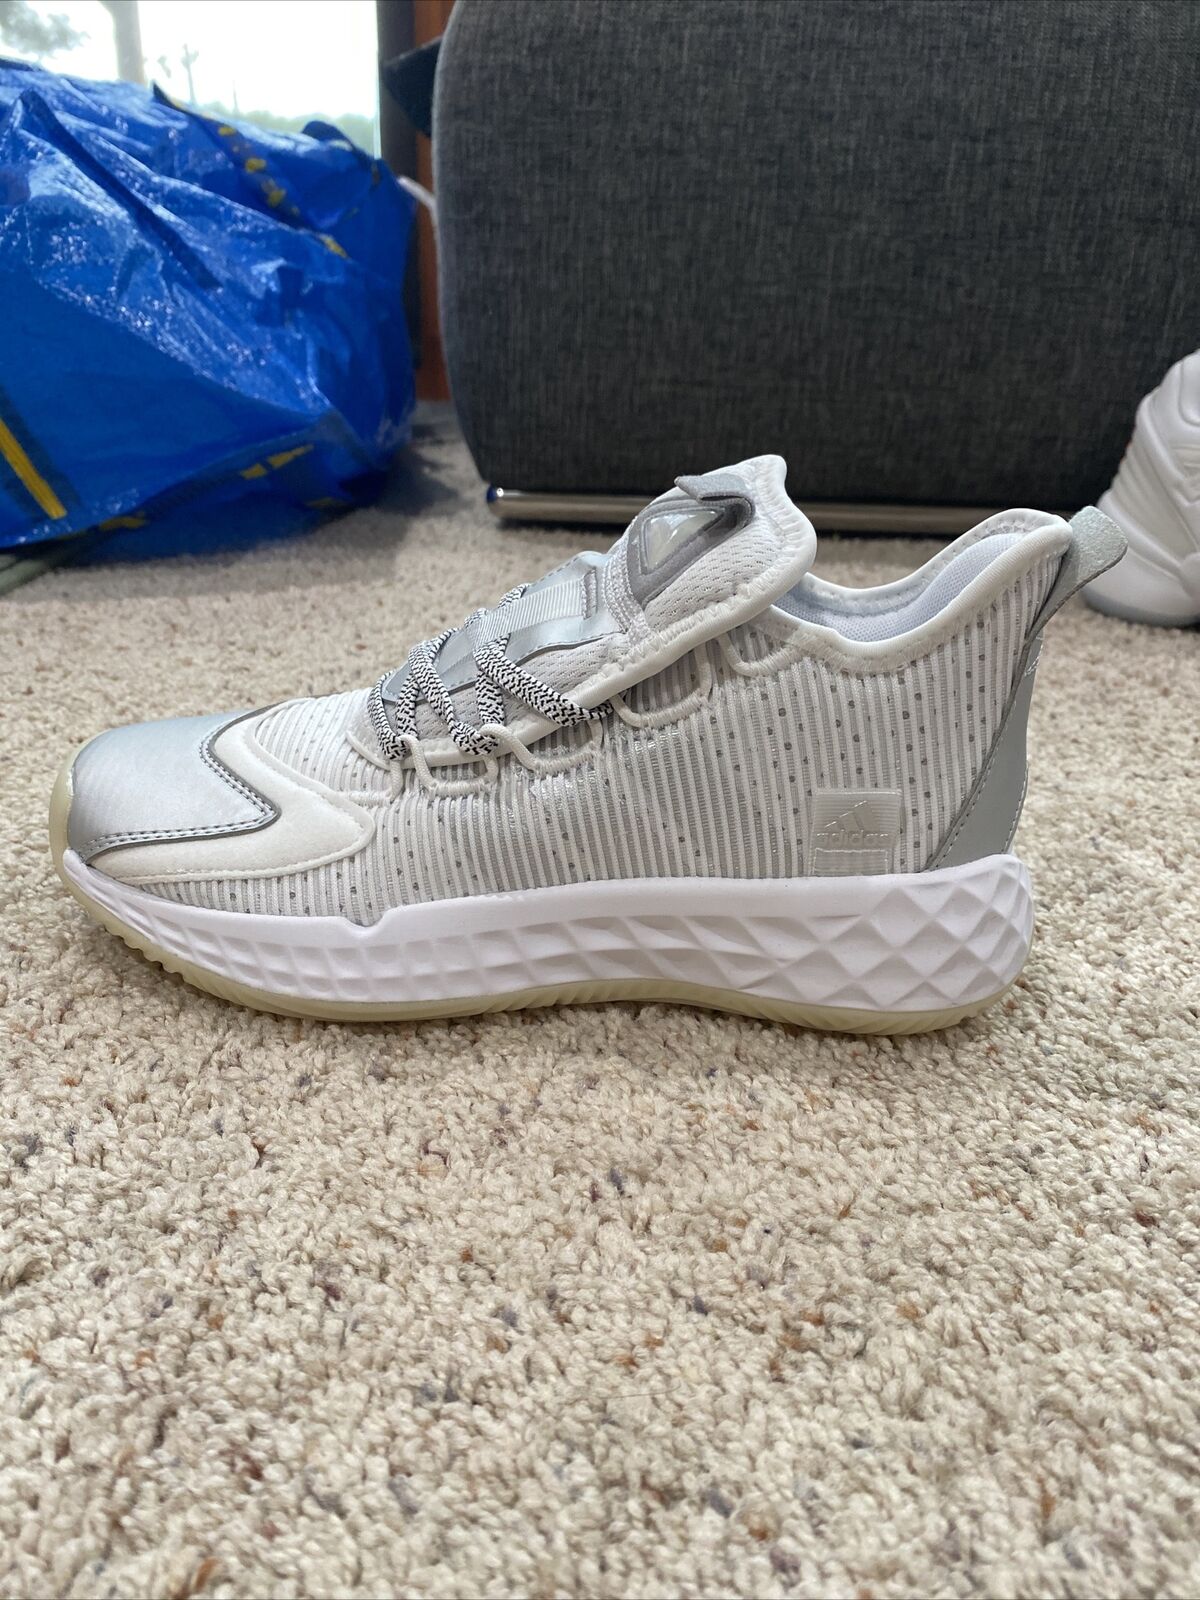 Adidas Pro Boost Low Basketball Shoe, Silver And White, 5.5